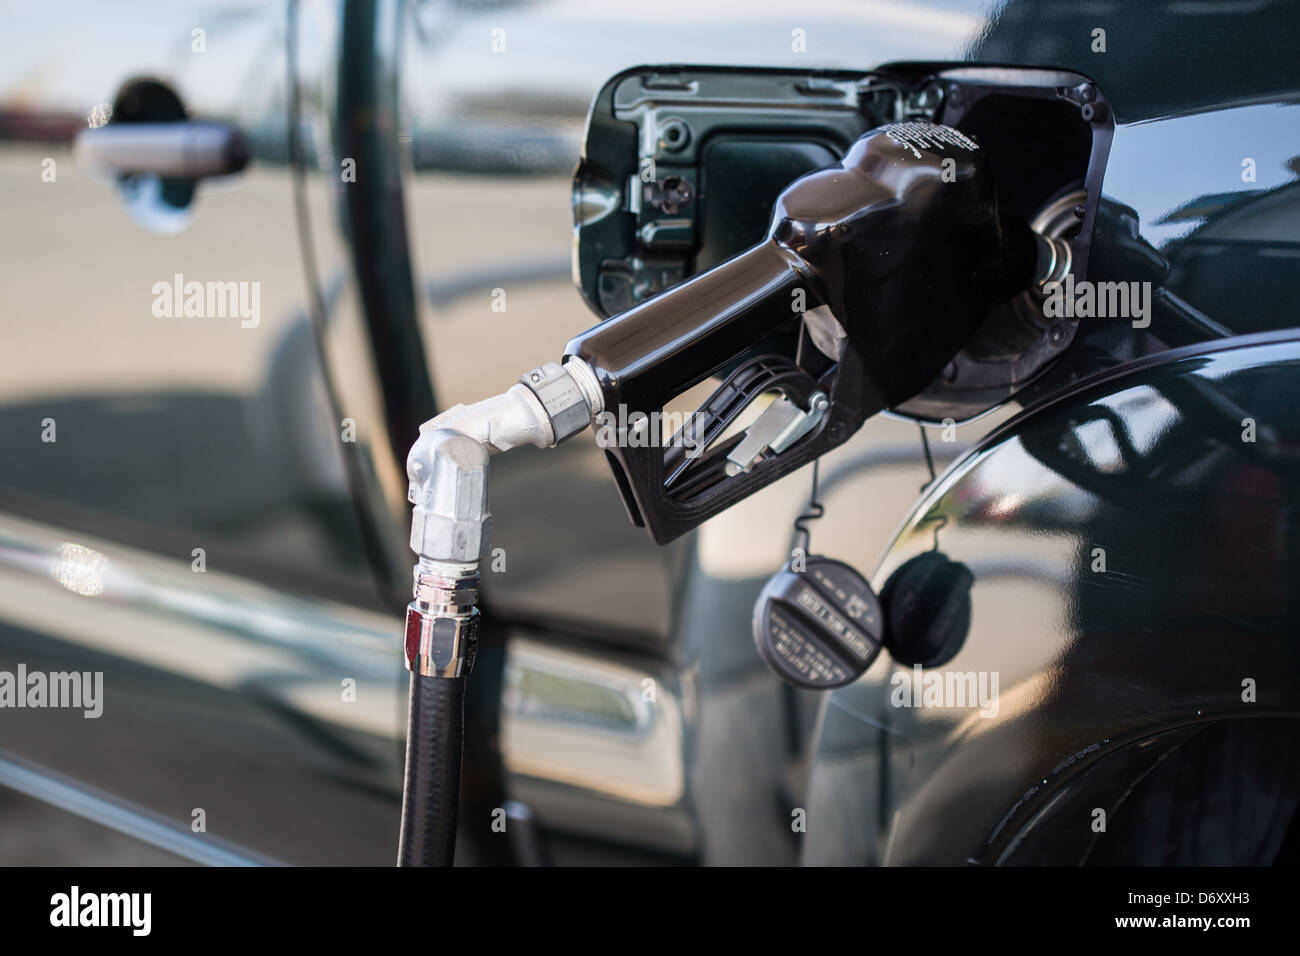 A close up of a gas pump filling up a green pickup truck. Fuel consumption. Stock Photo